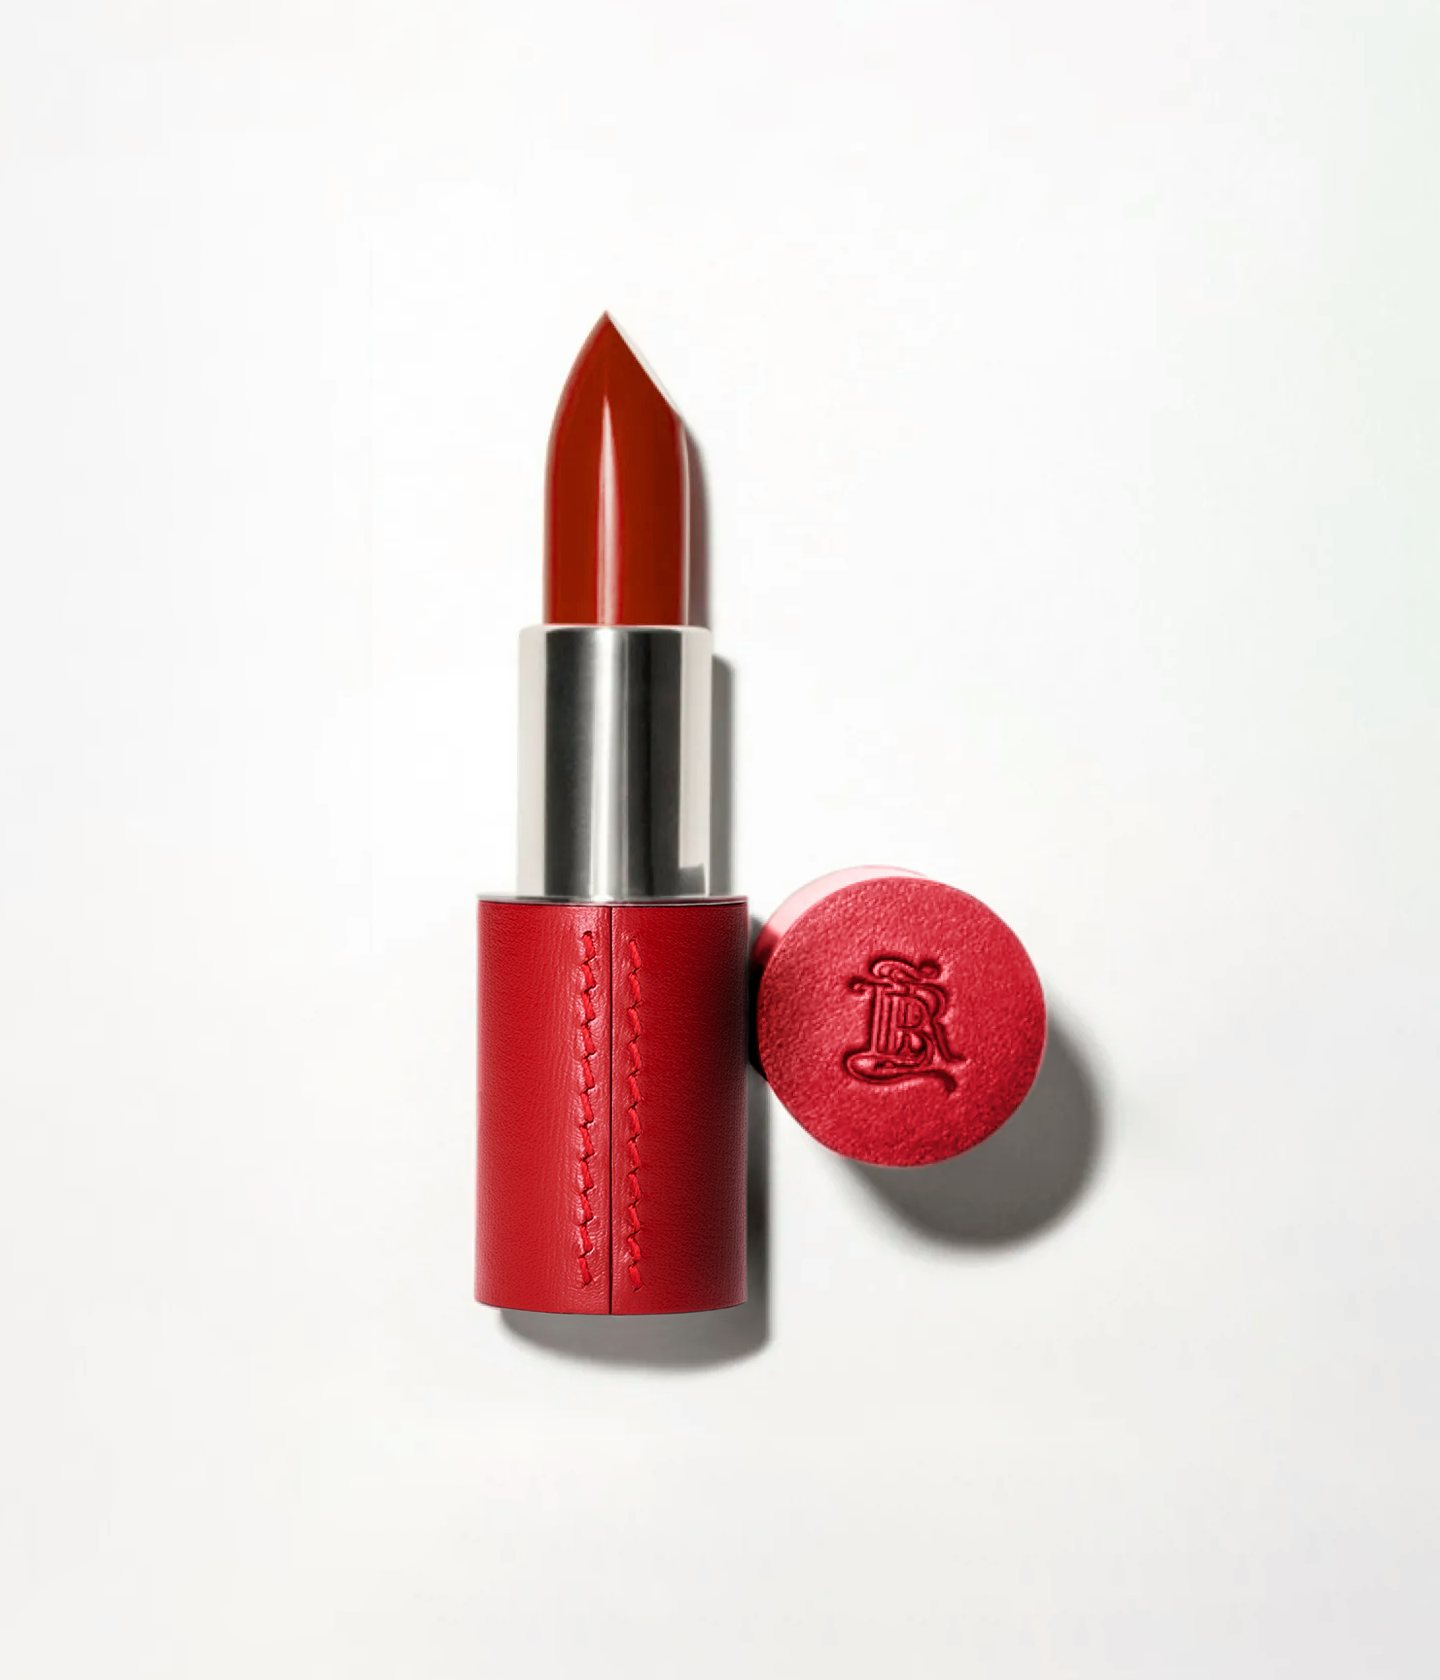 La bouche rouge The Iconic Nude Red set